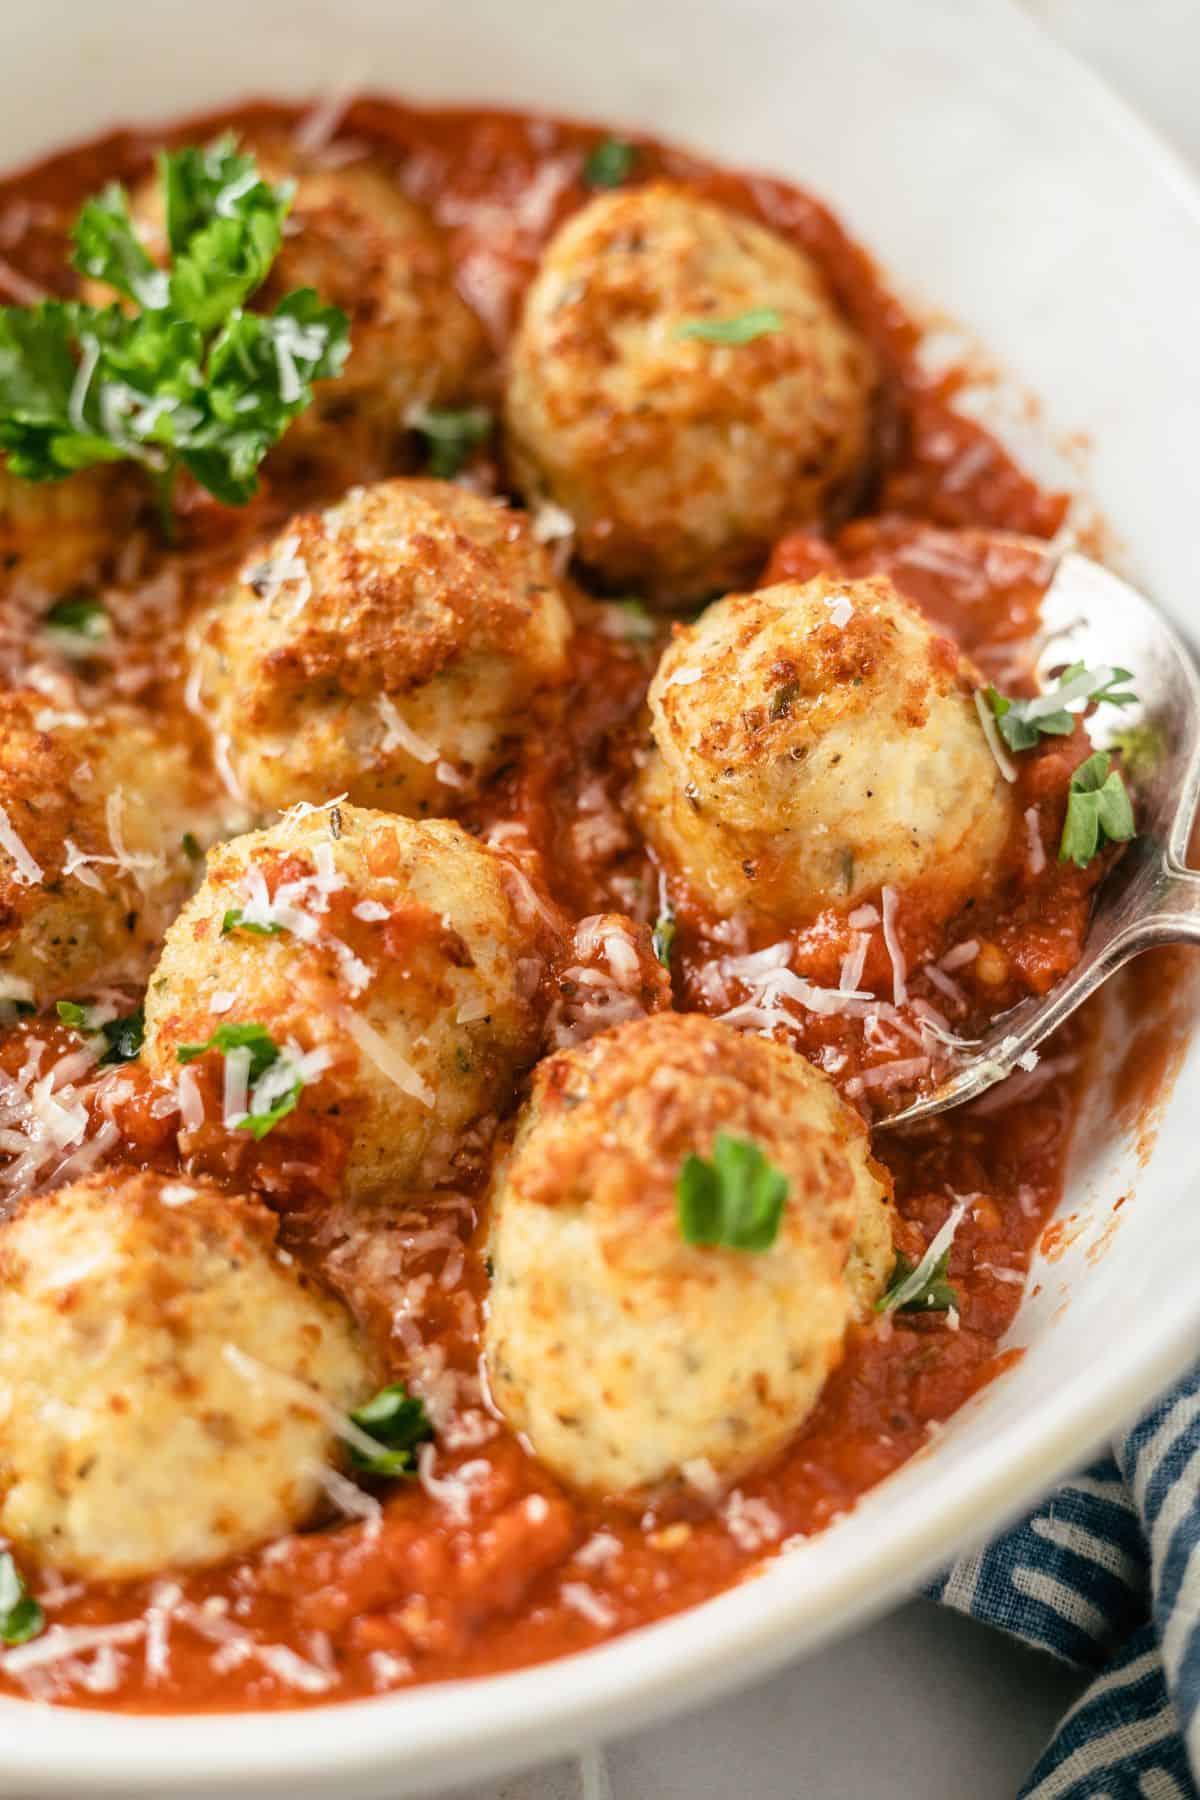 Delectably seasoned and cooked ground chicken meatballs, enticingly presented with marinara sauce, fresh parsley and shaved parmesan cheese in a generous bowl